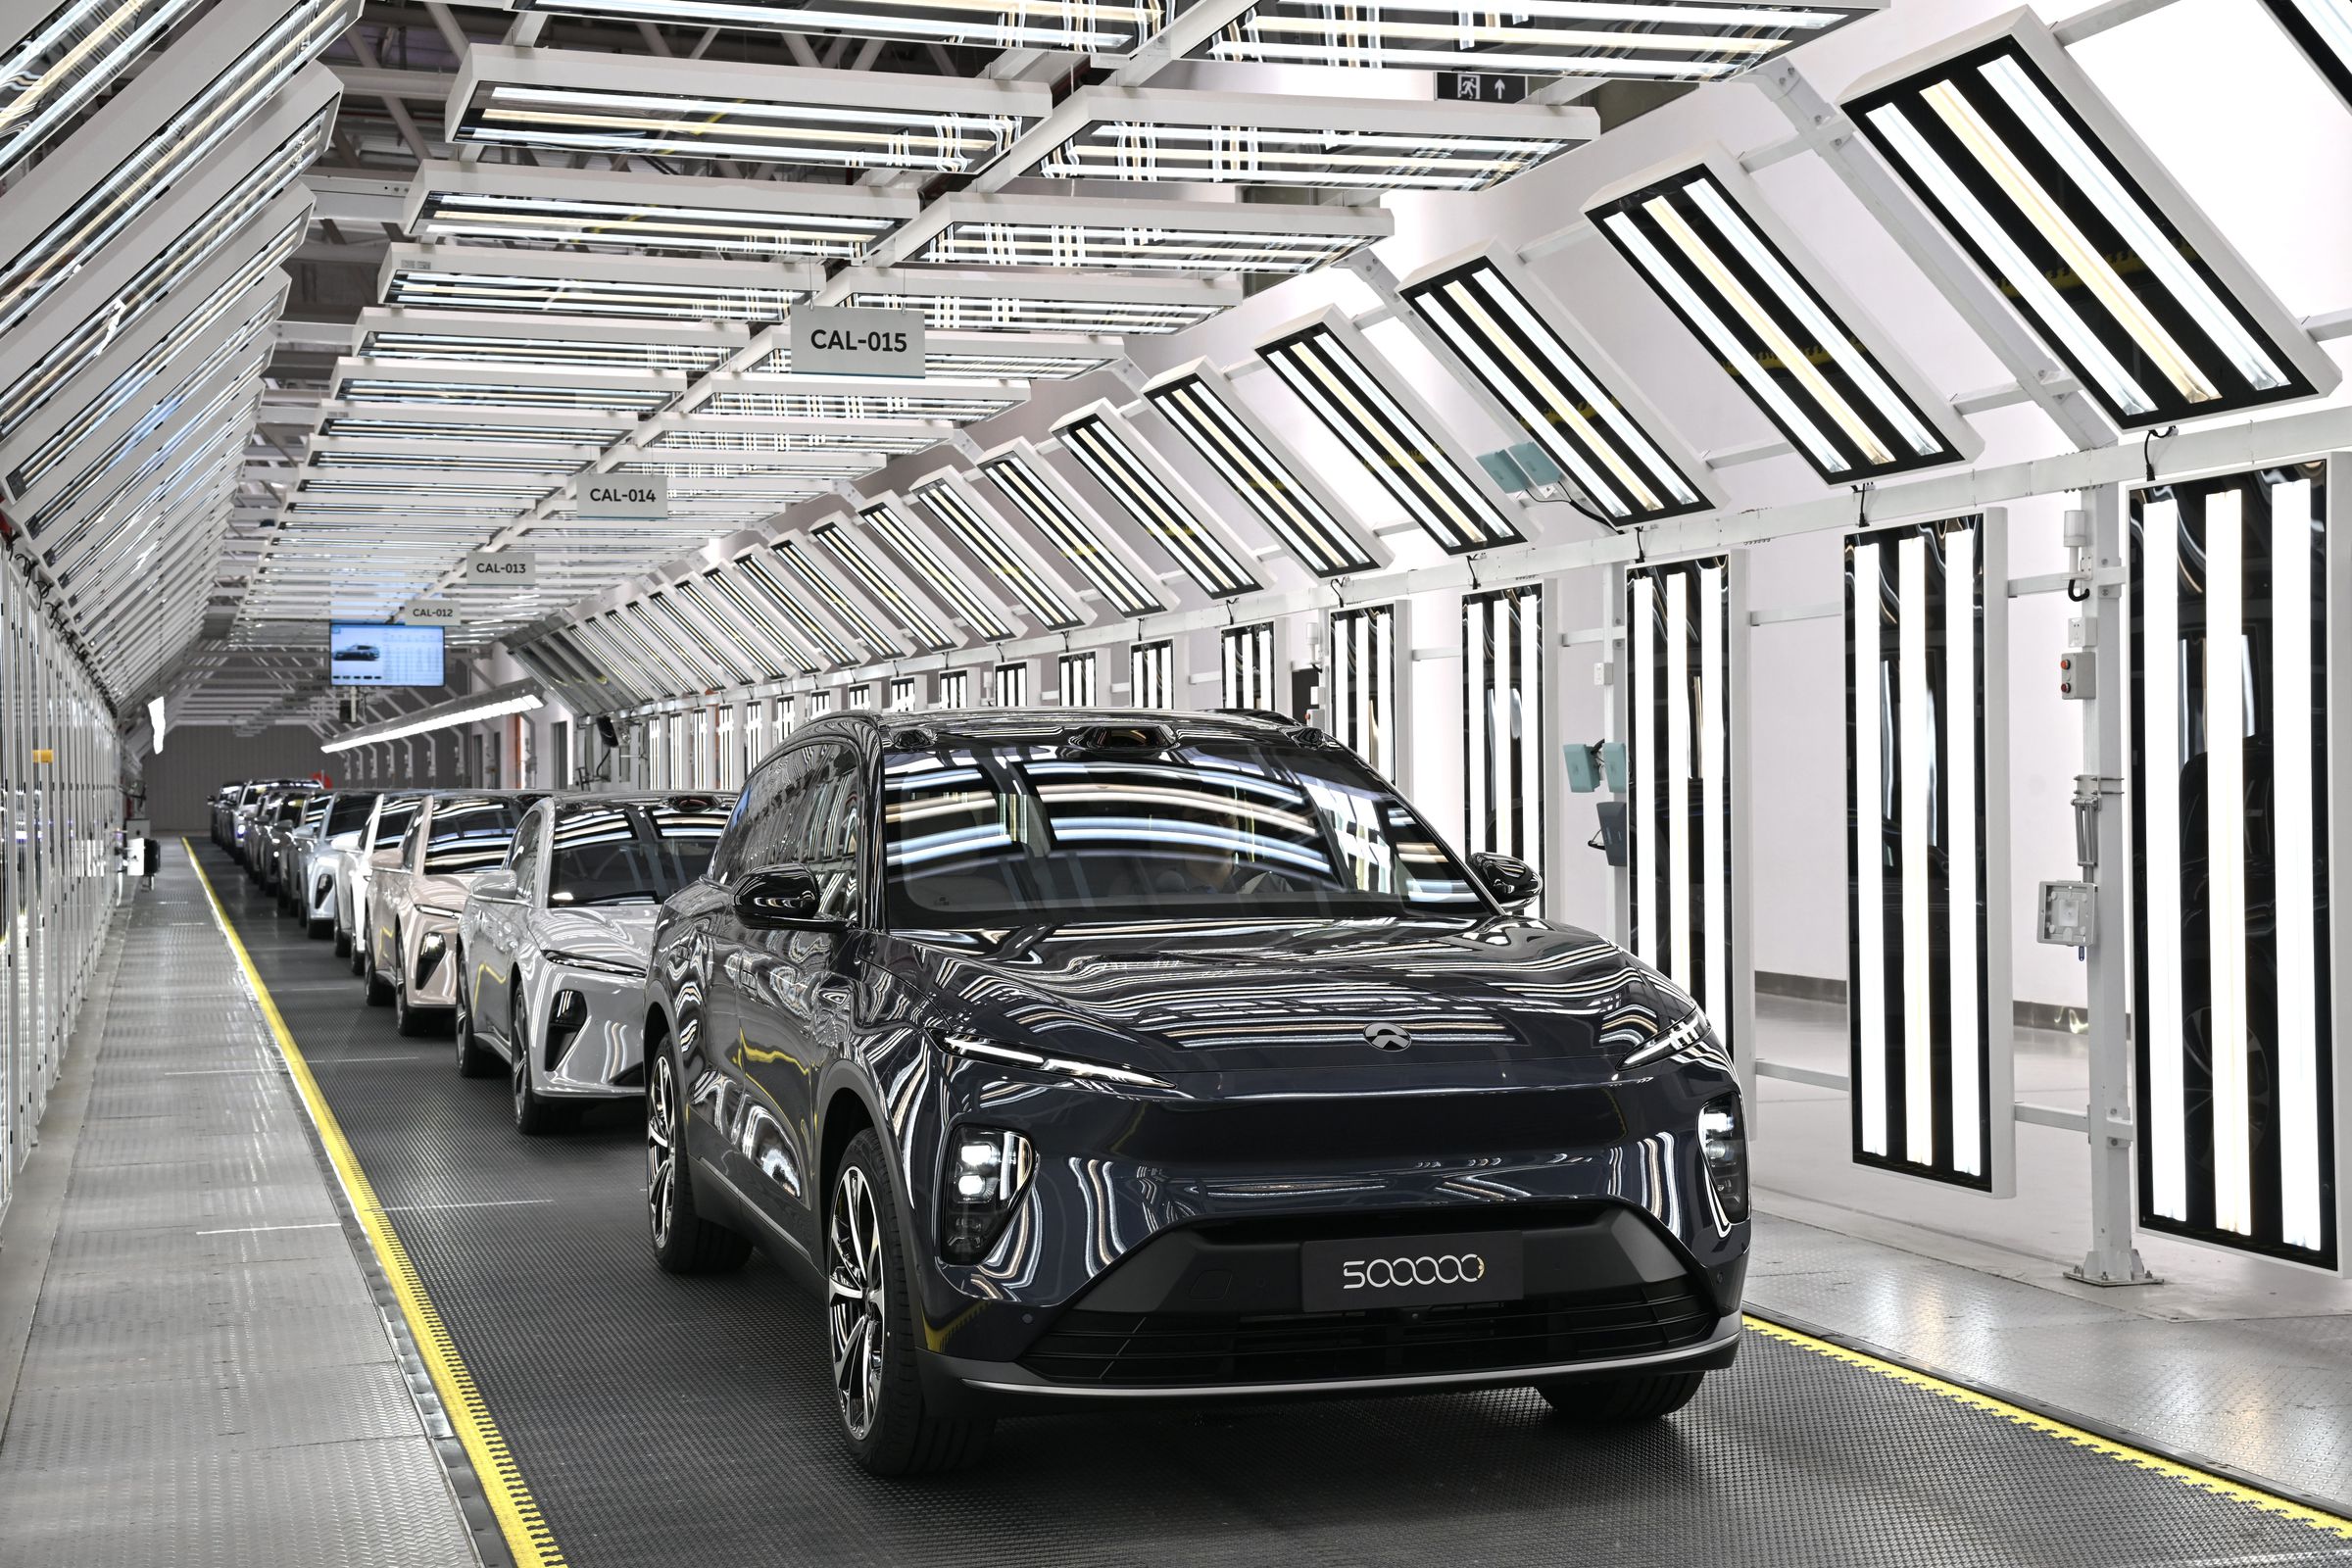 Chinese Electric Car Maker Nio’s 500,000th Vehicle Rolls Off The Production Line In Hefei